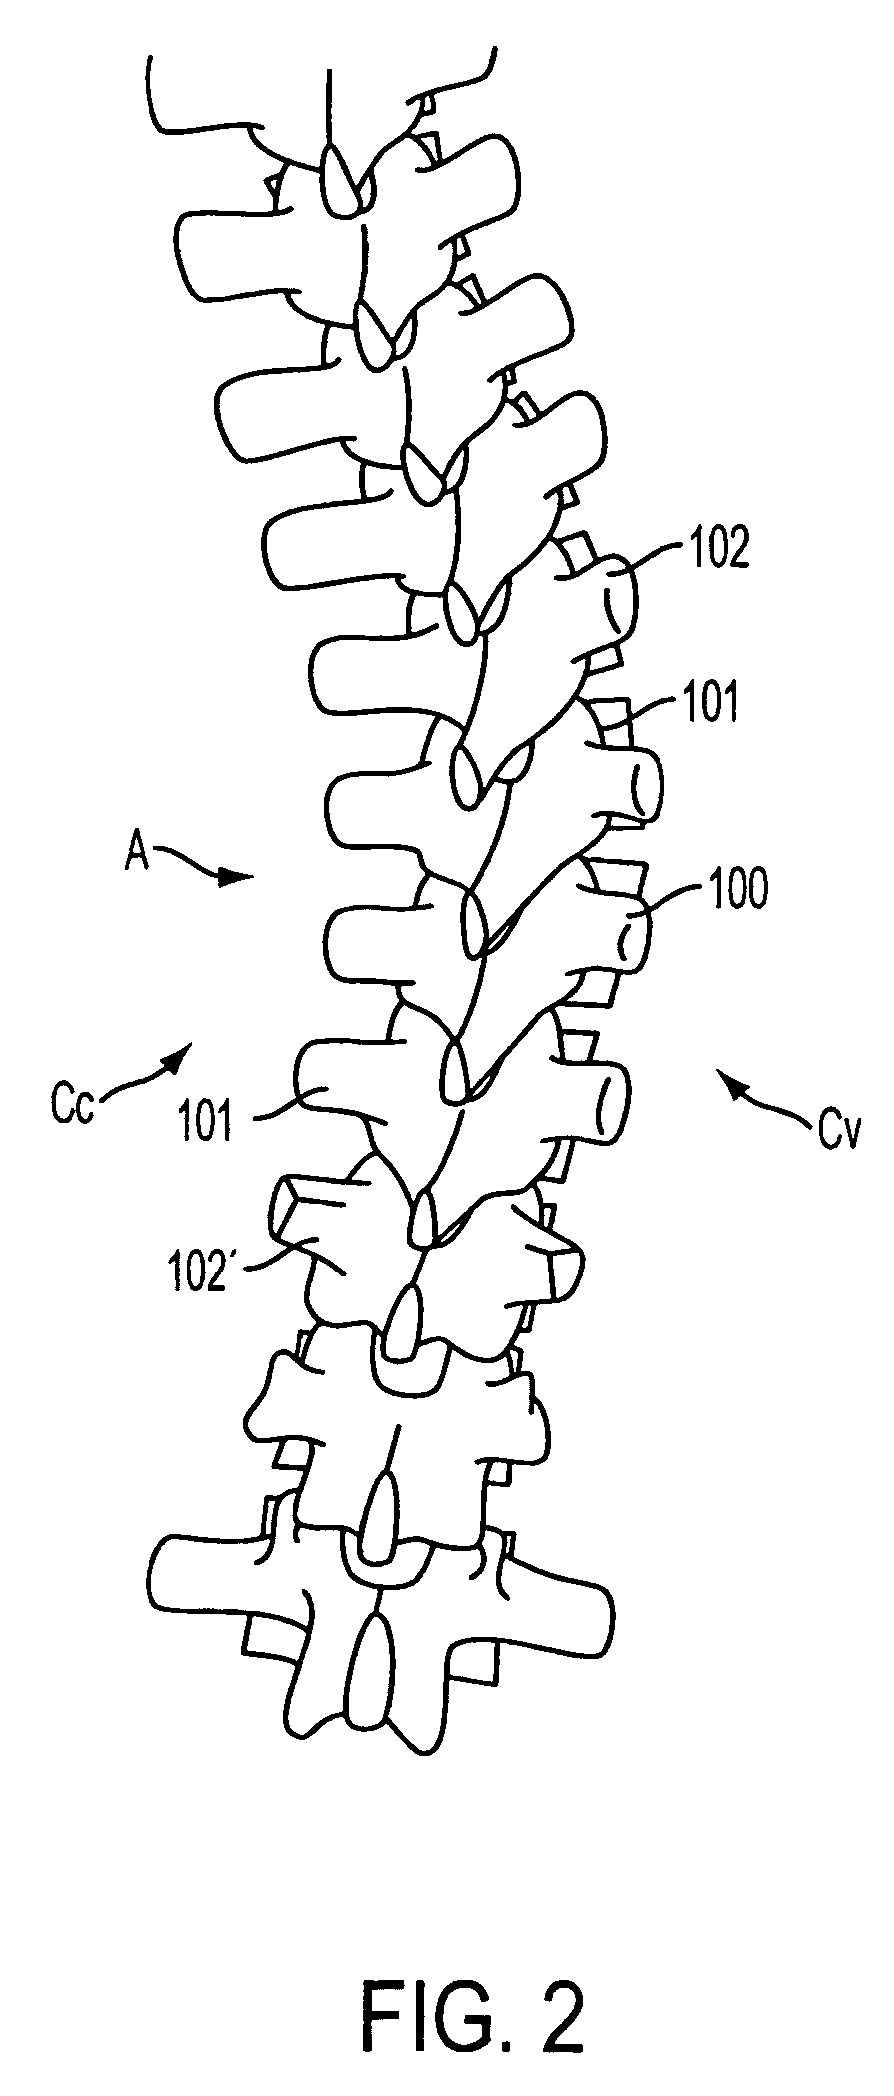 Device for dynamic spinal fixation for correction of spinal deformities